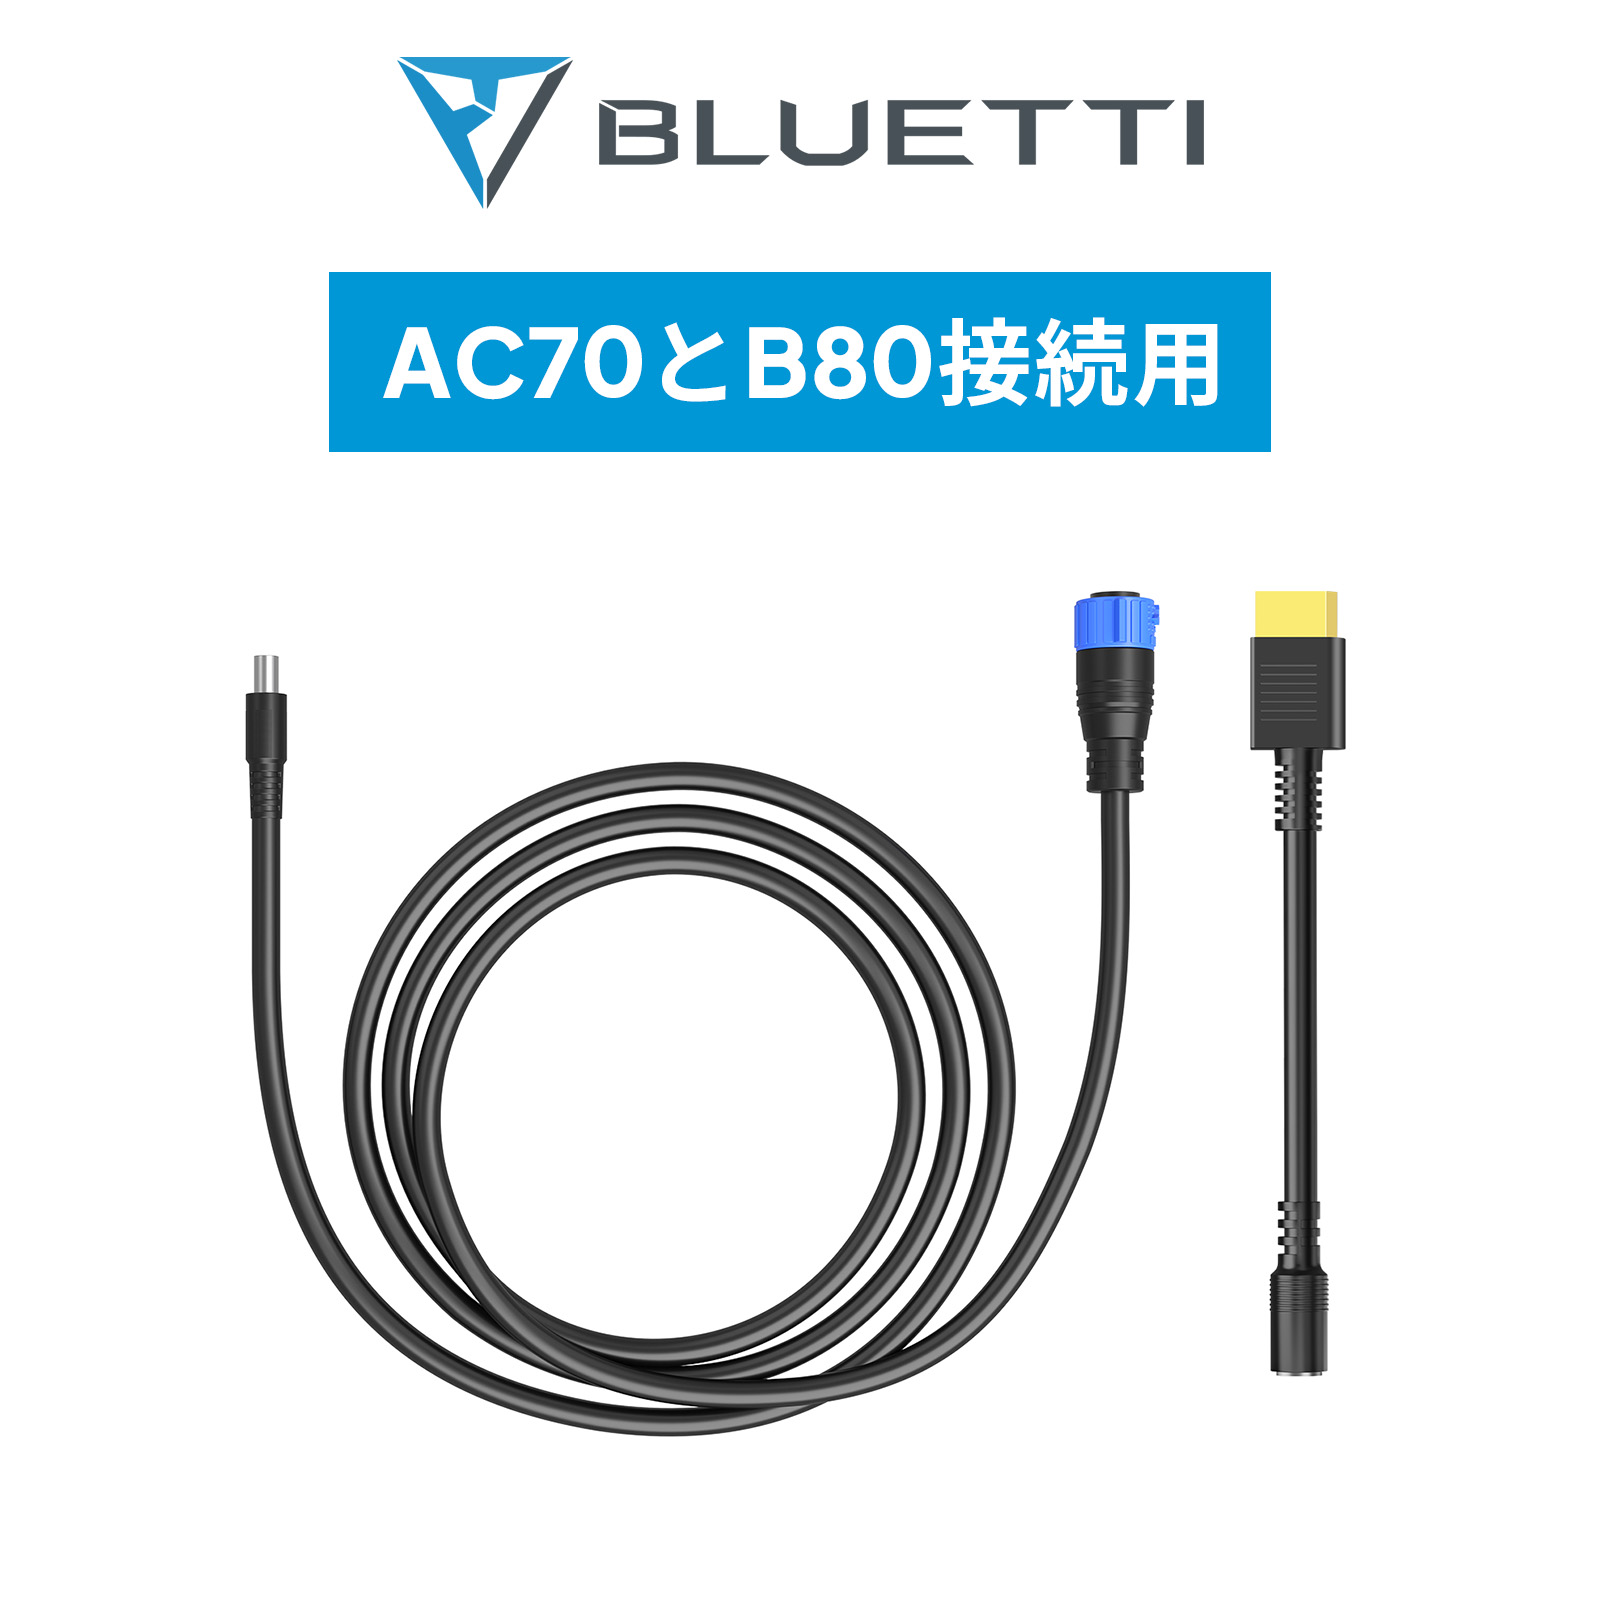 BLUETTI portable power supply for aviation plug from XT60 to conversion cable B80.AC70 / AC2A /EB55 portable power supply for connection cable 